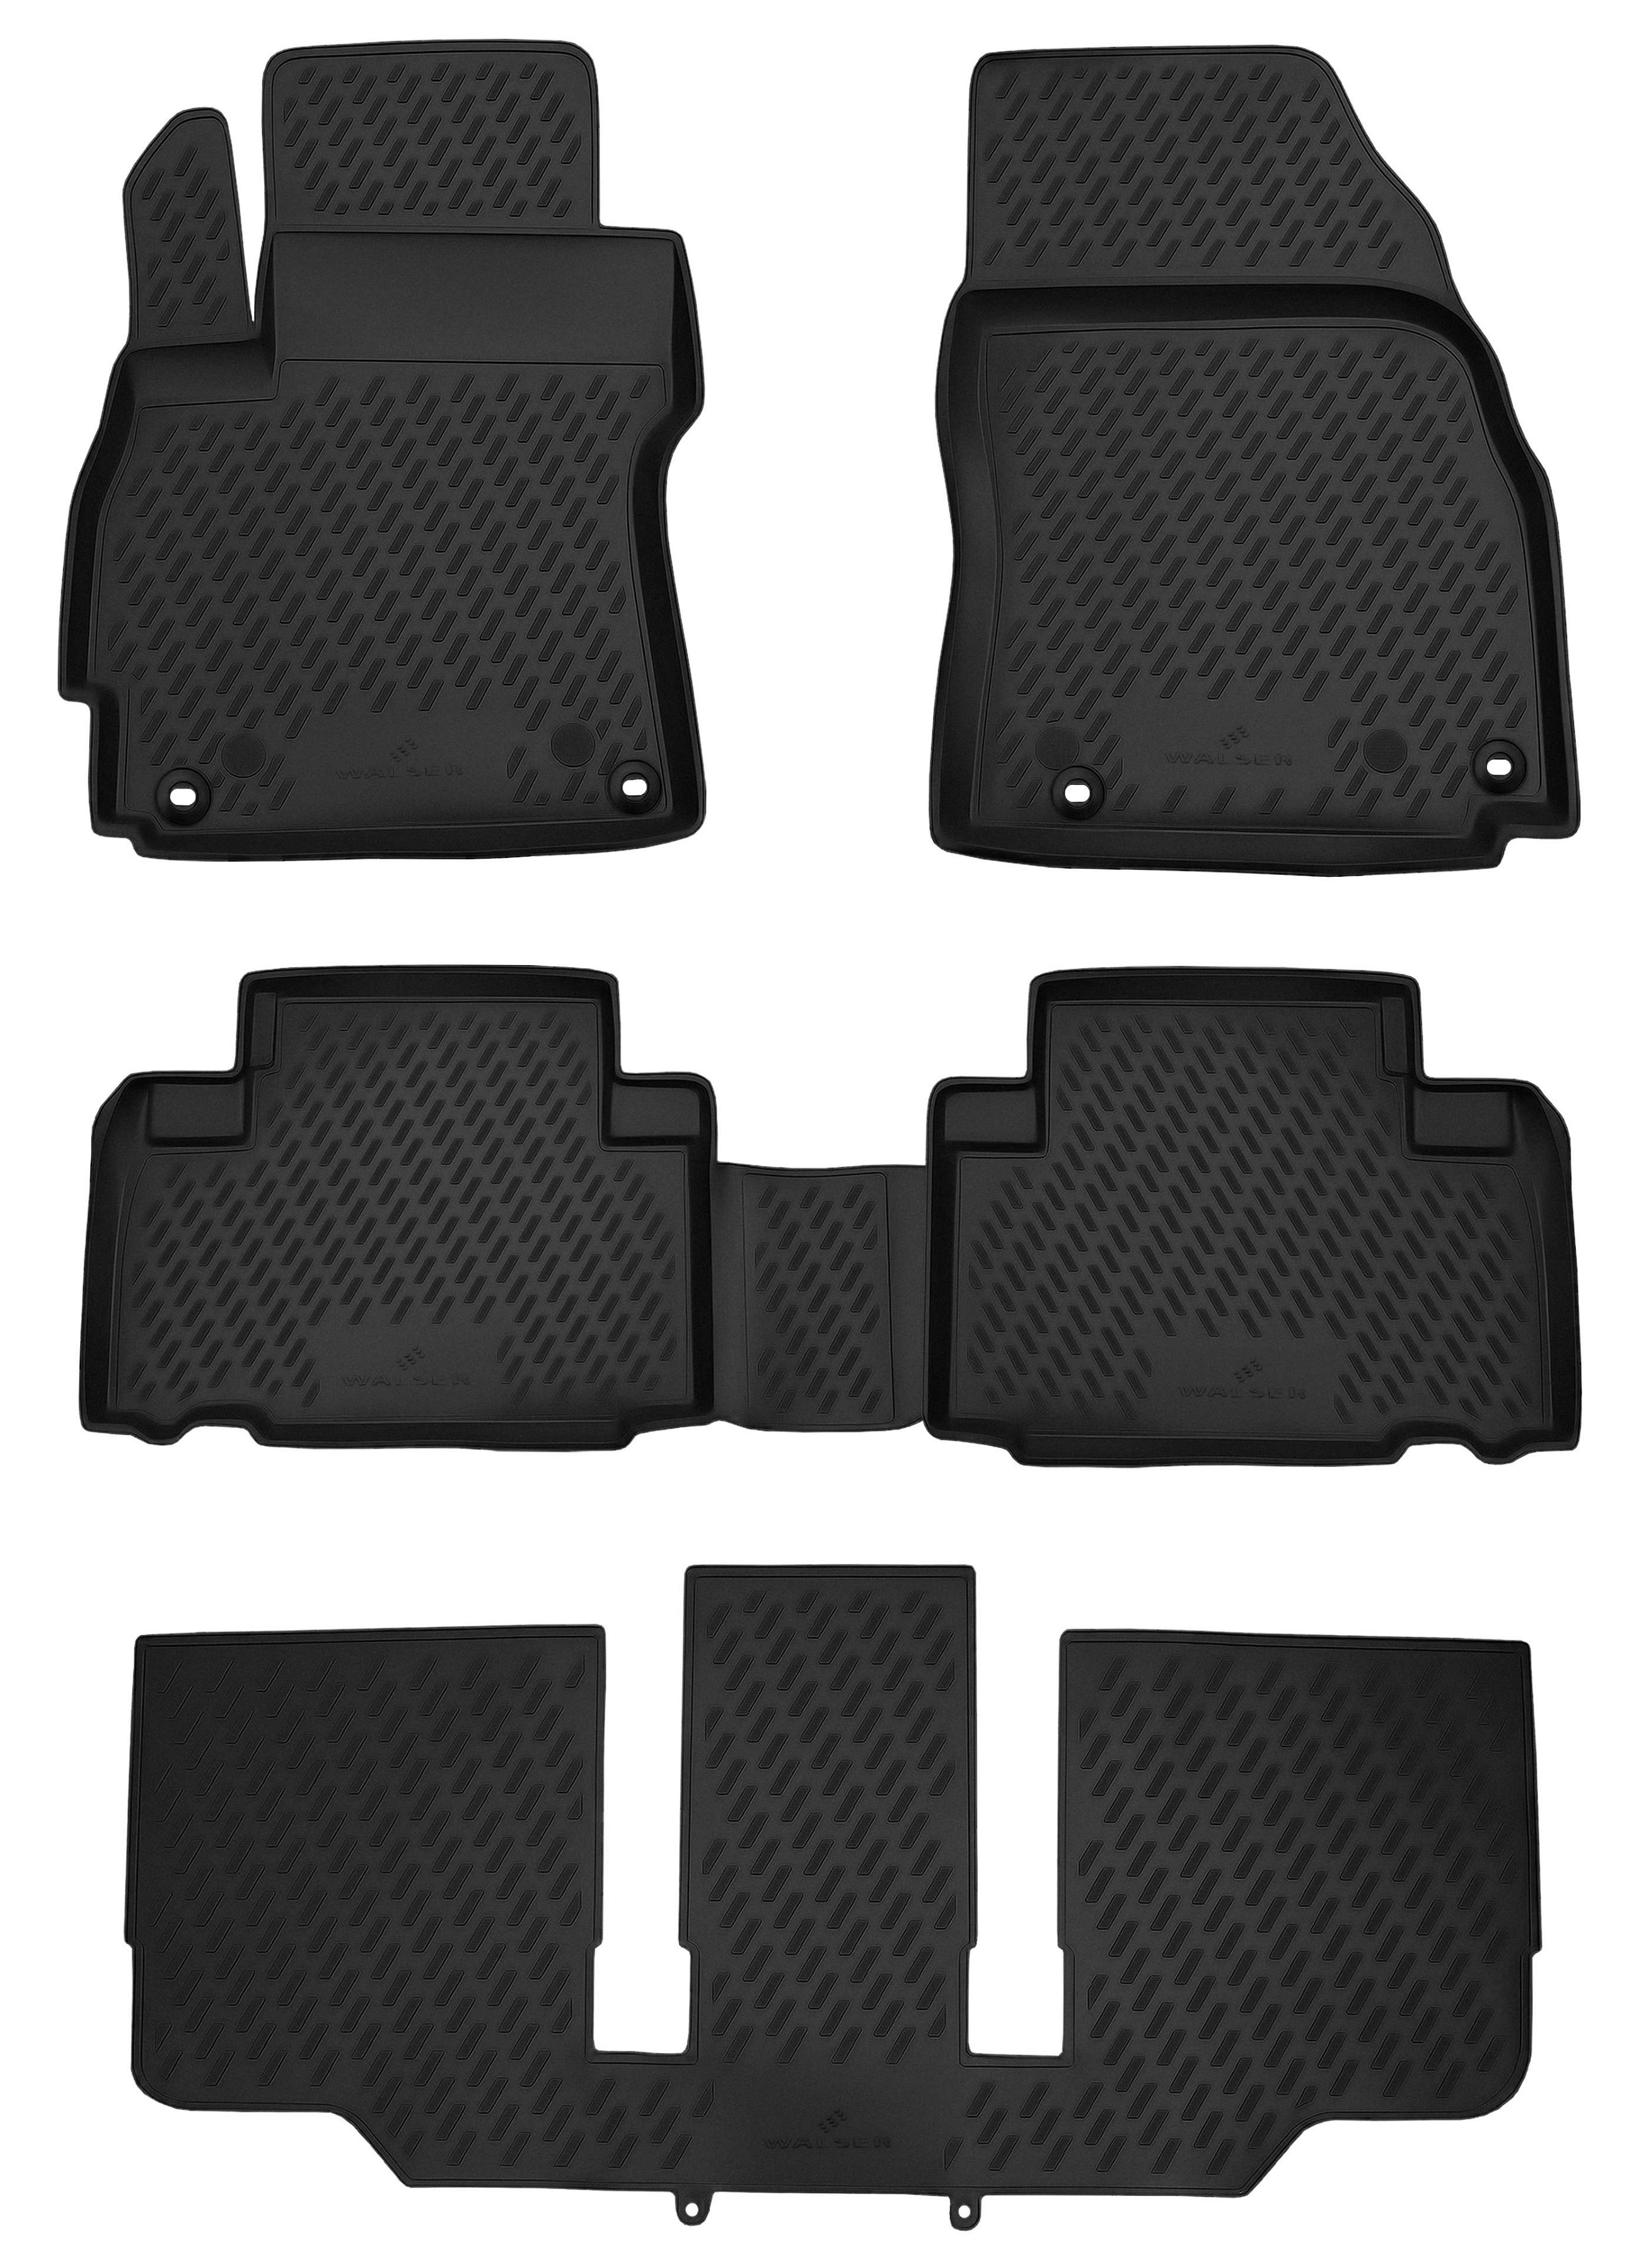 XTR Rubber Mats for Mazda 5, 7-seater 06/2010-Today